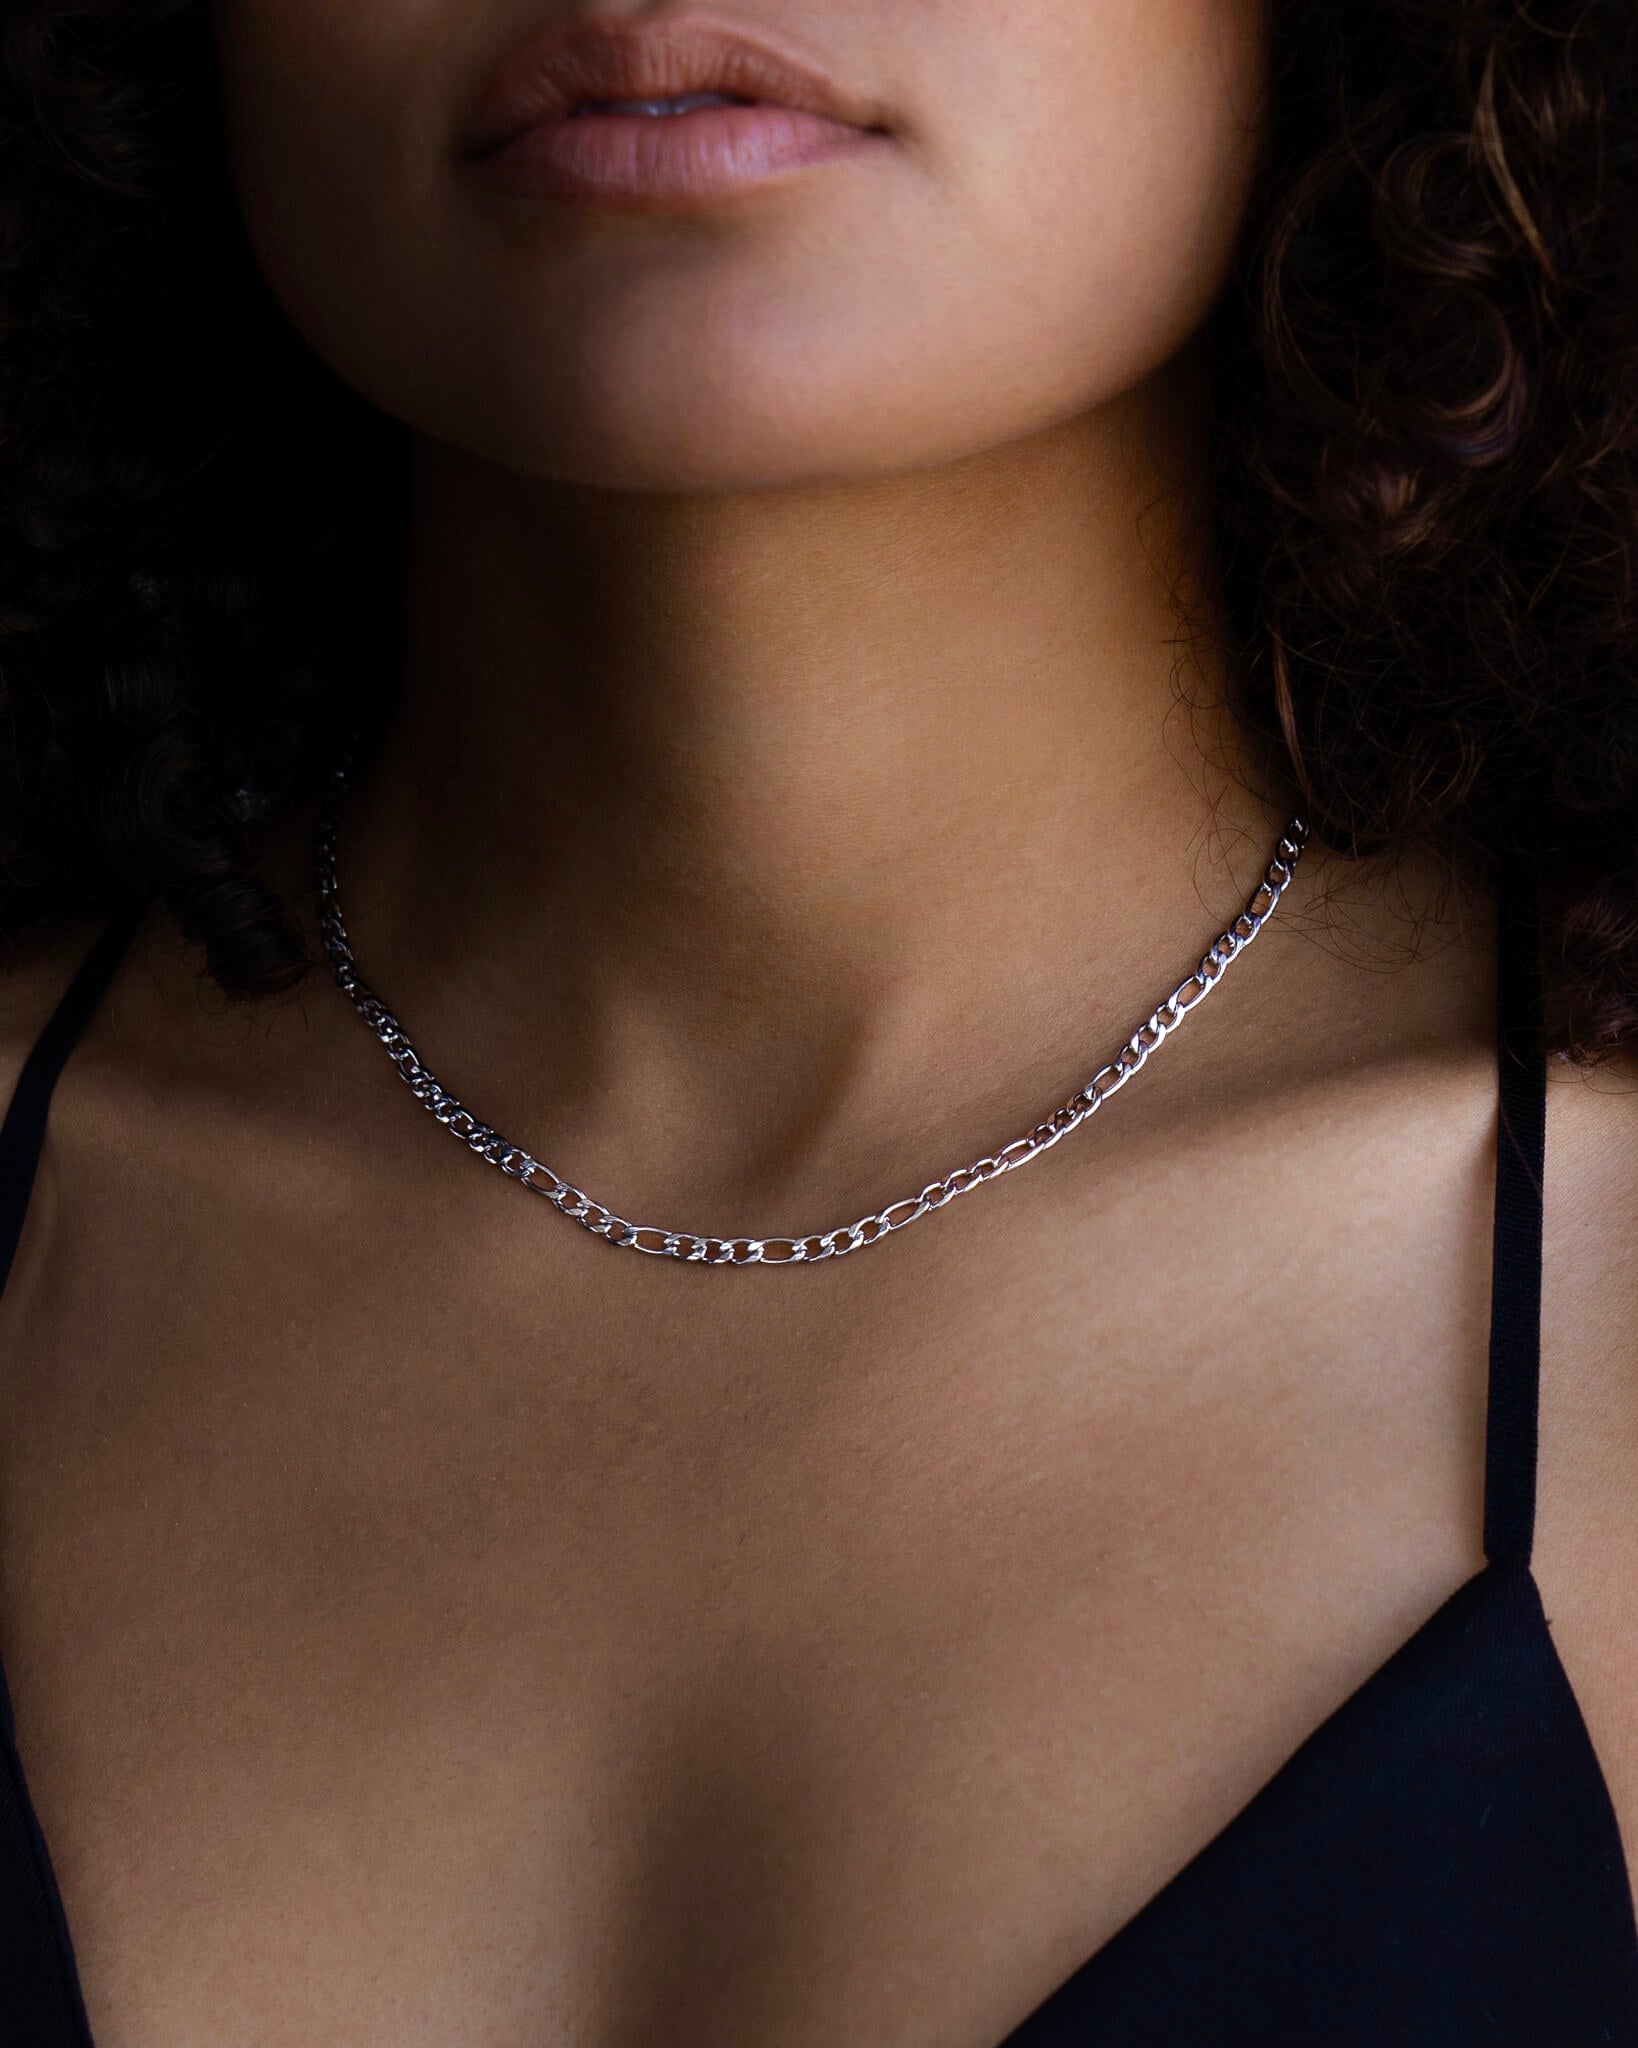 Valencia women's necklace by Five Jwlry, crafted from a 4mm figaro chain in silver-colored, water-resistant 316L stainless steel. Available in size 40cm with a 5cm extension. Hypoallergenic with a 2-year warranty.